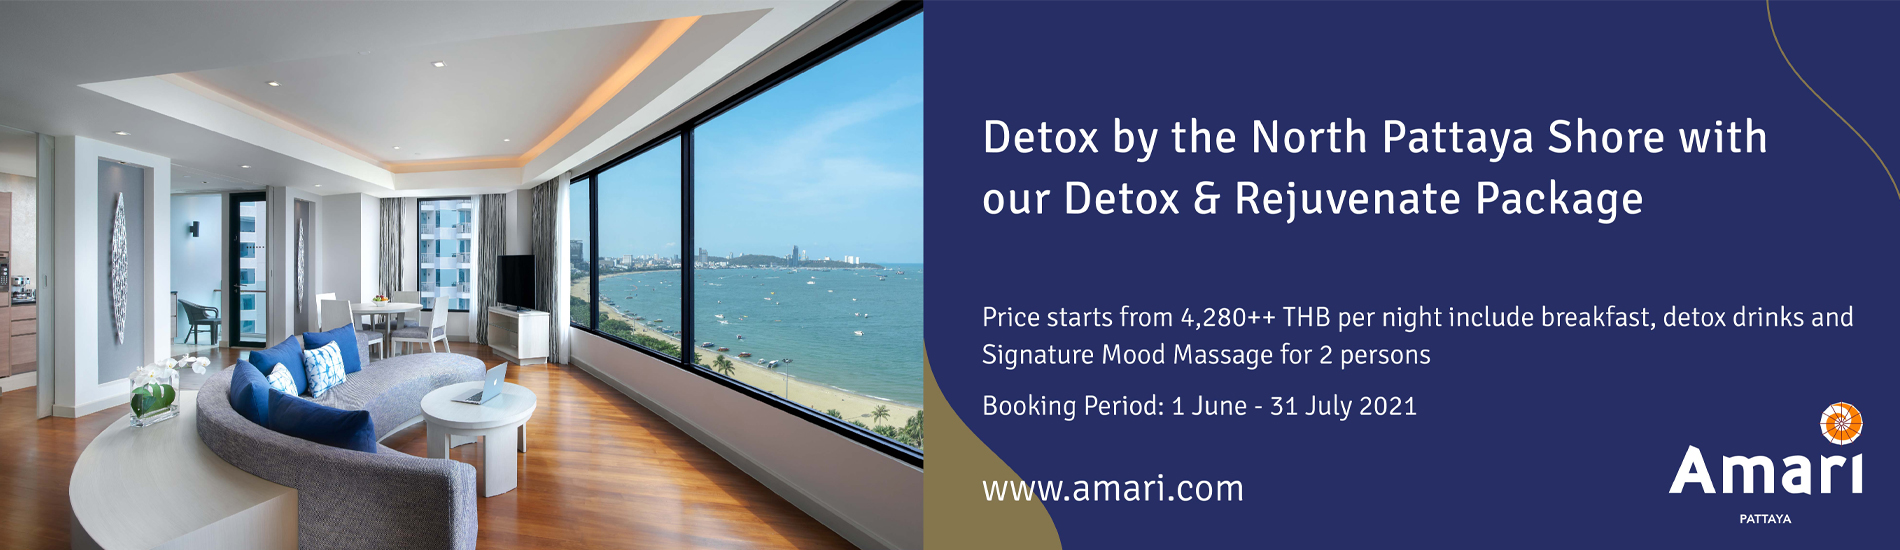 Detox by the North Pattaya Shore with our Detox & Rejuvenate Package